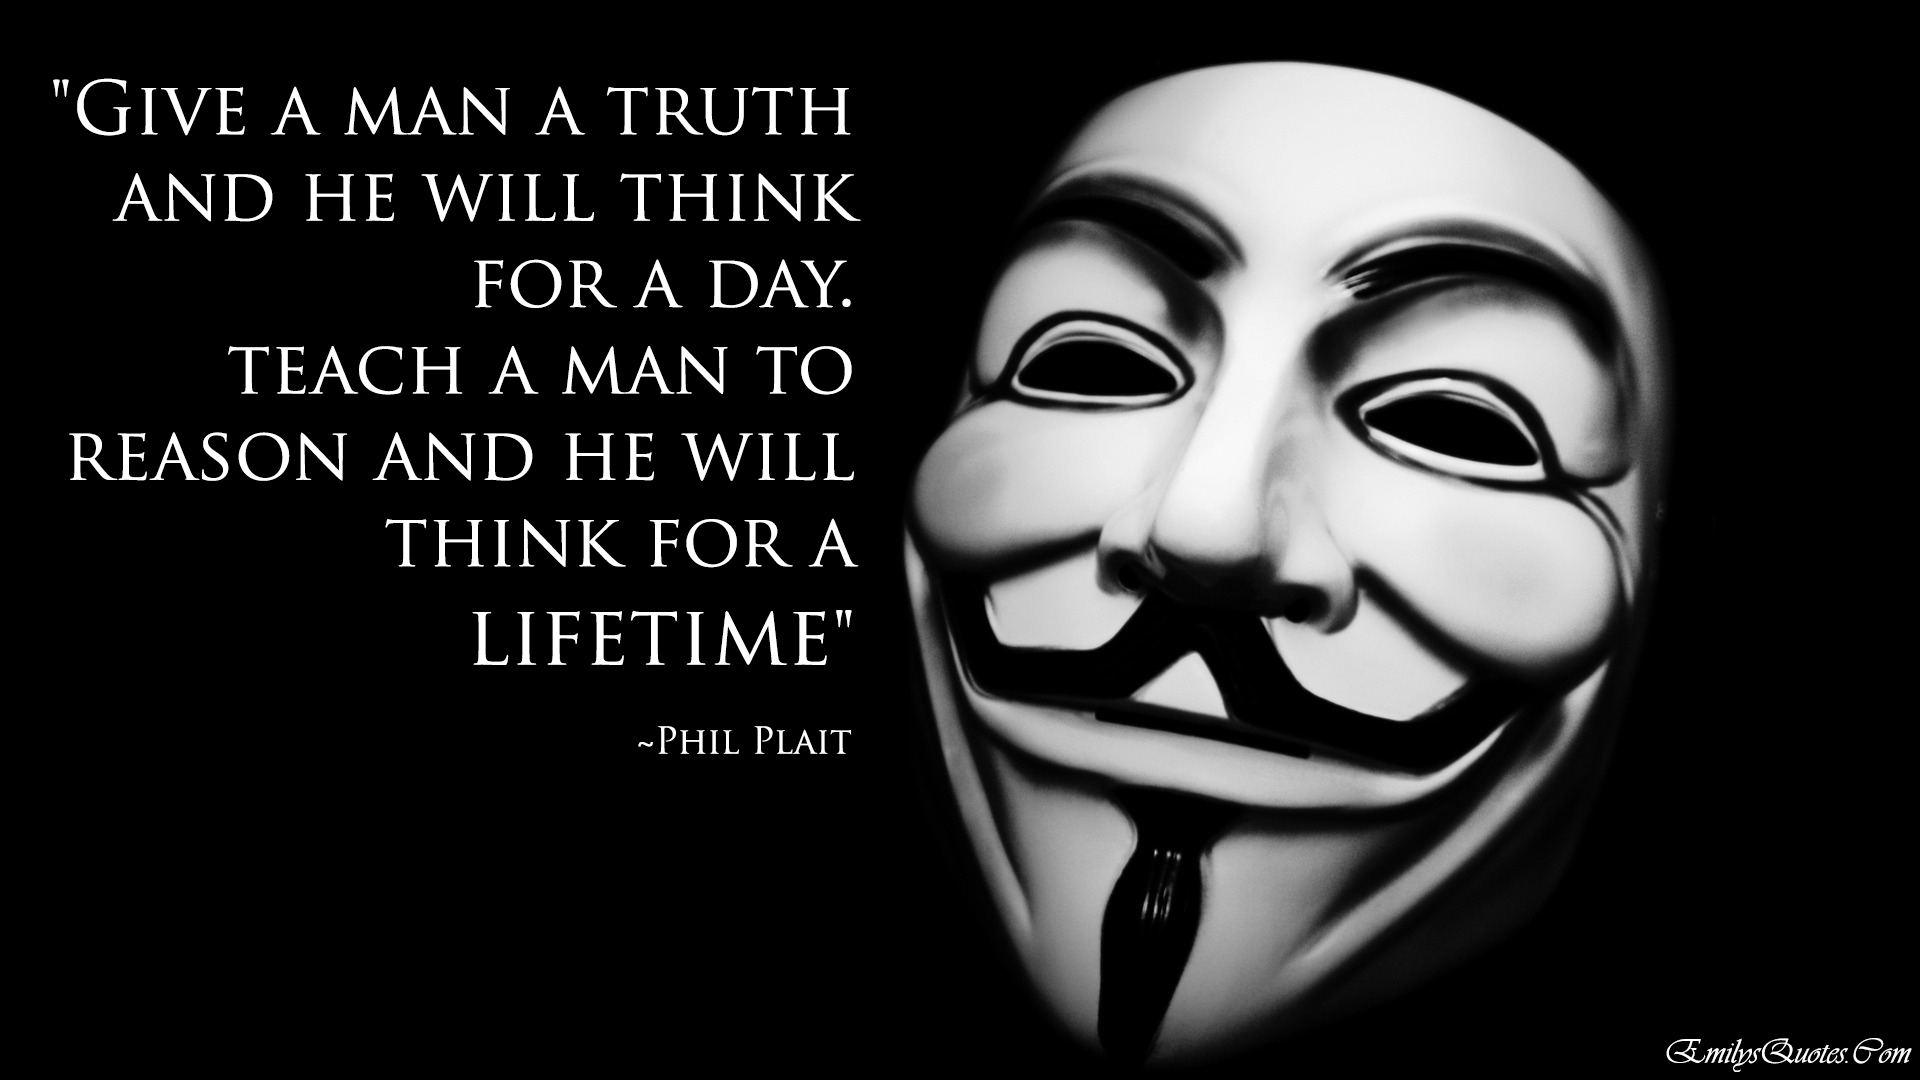 Give a man a truth and he will think for a day teach a man to reason and he will think for a lifetime